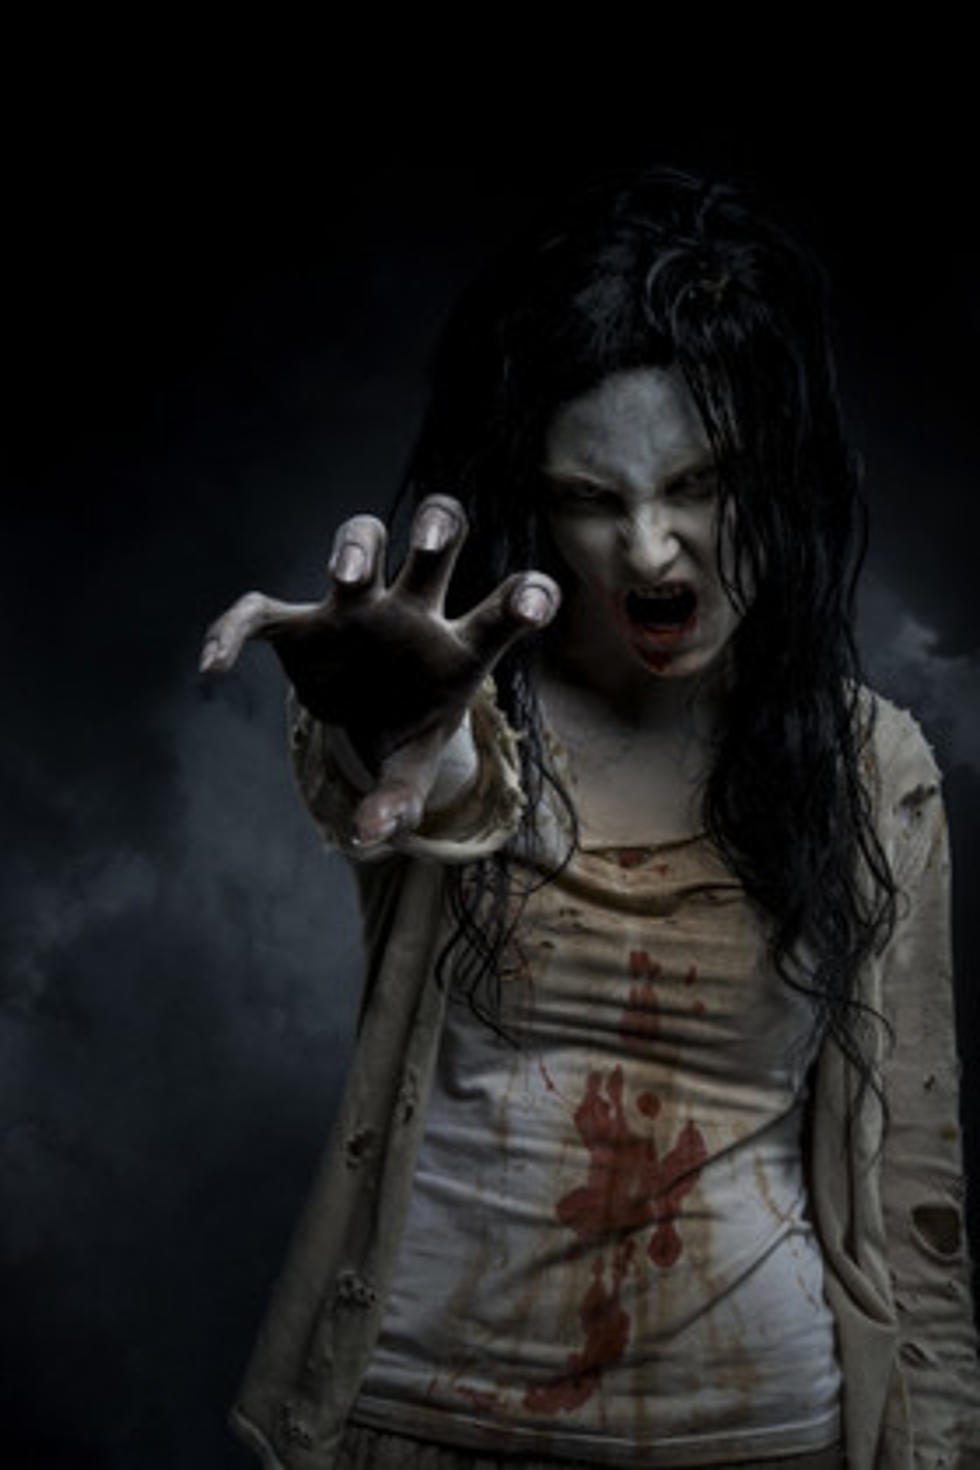 Zombie Game, New Trend? Hope Not – Global Oddities [VIDEO]